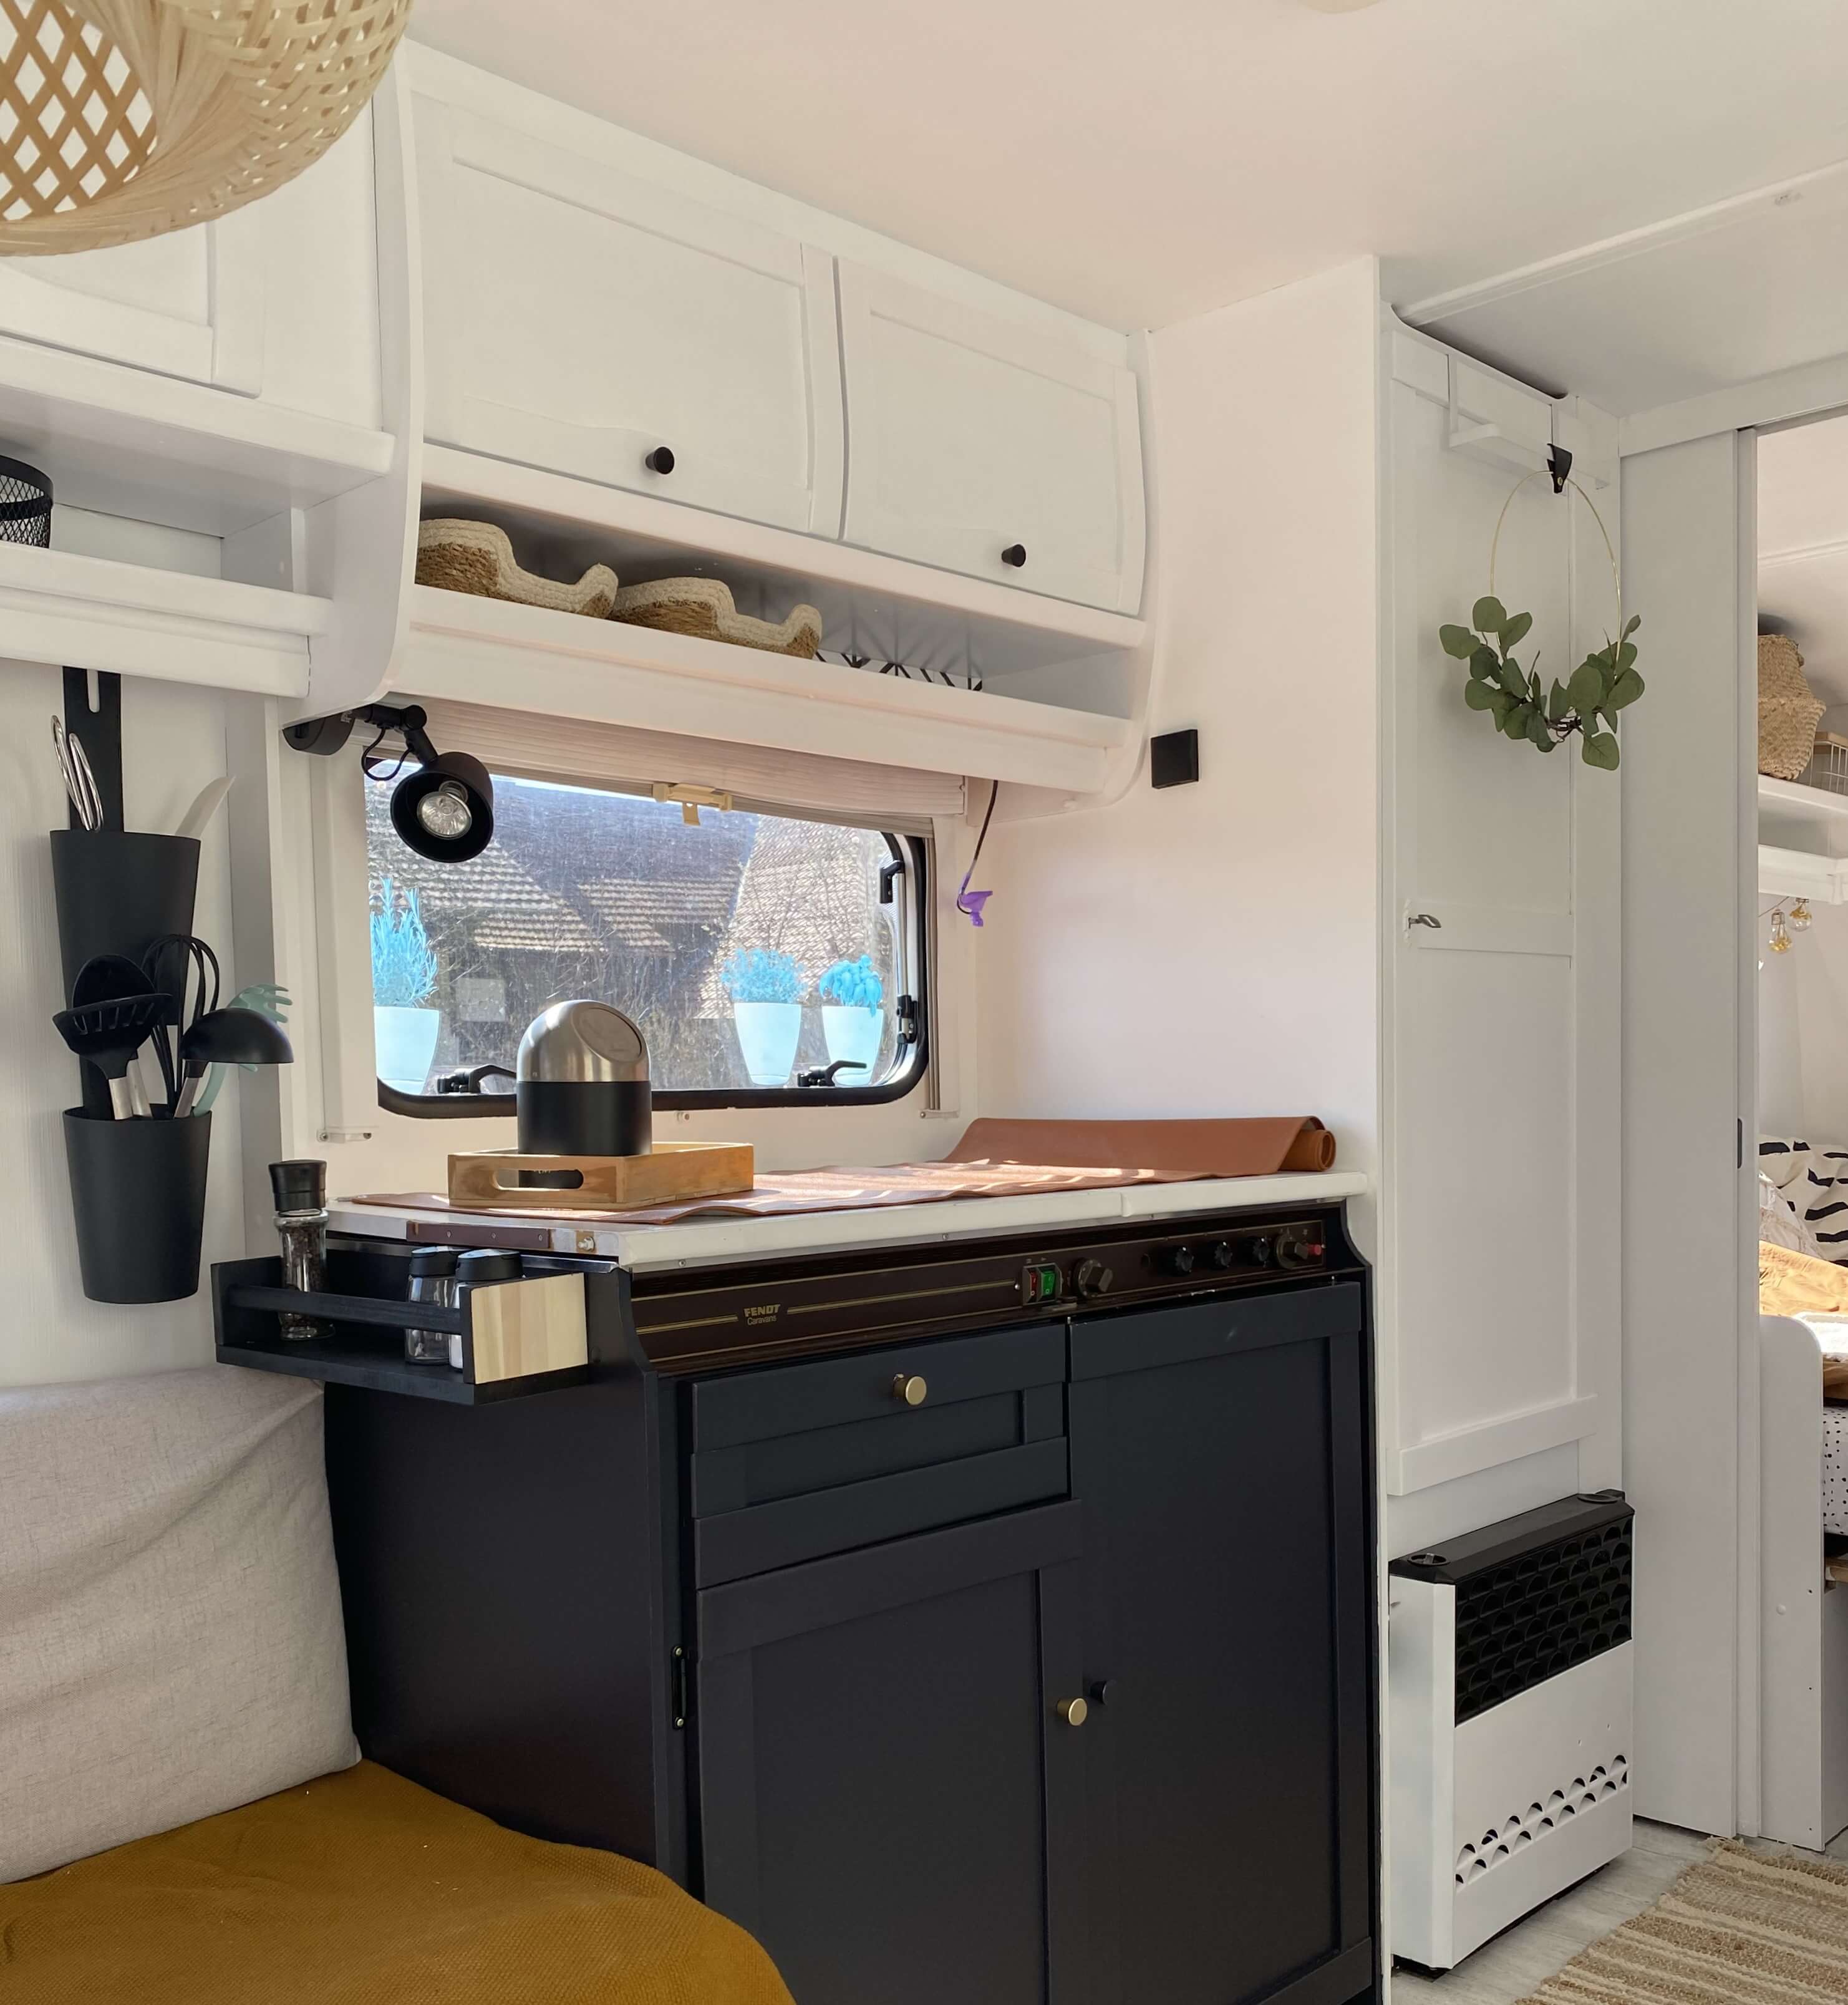 Inspiration for your Business's Enclosed Trailer Remodel: Mobile Fashion  Boutique DIY